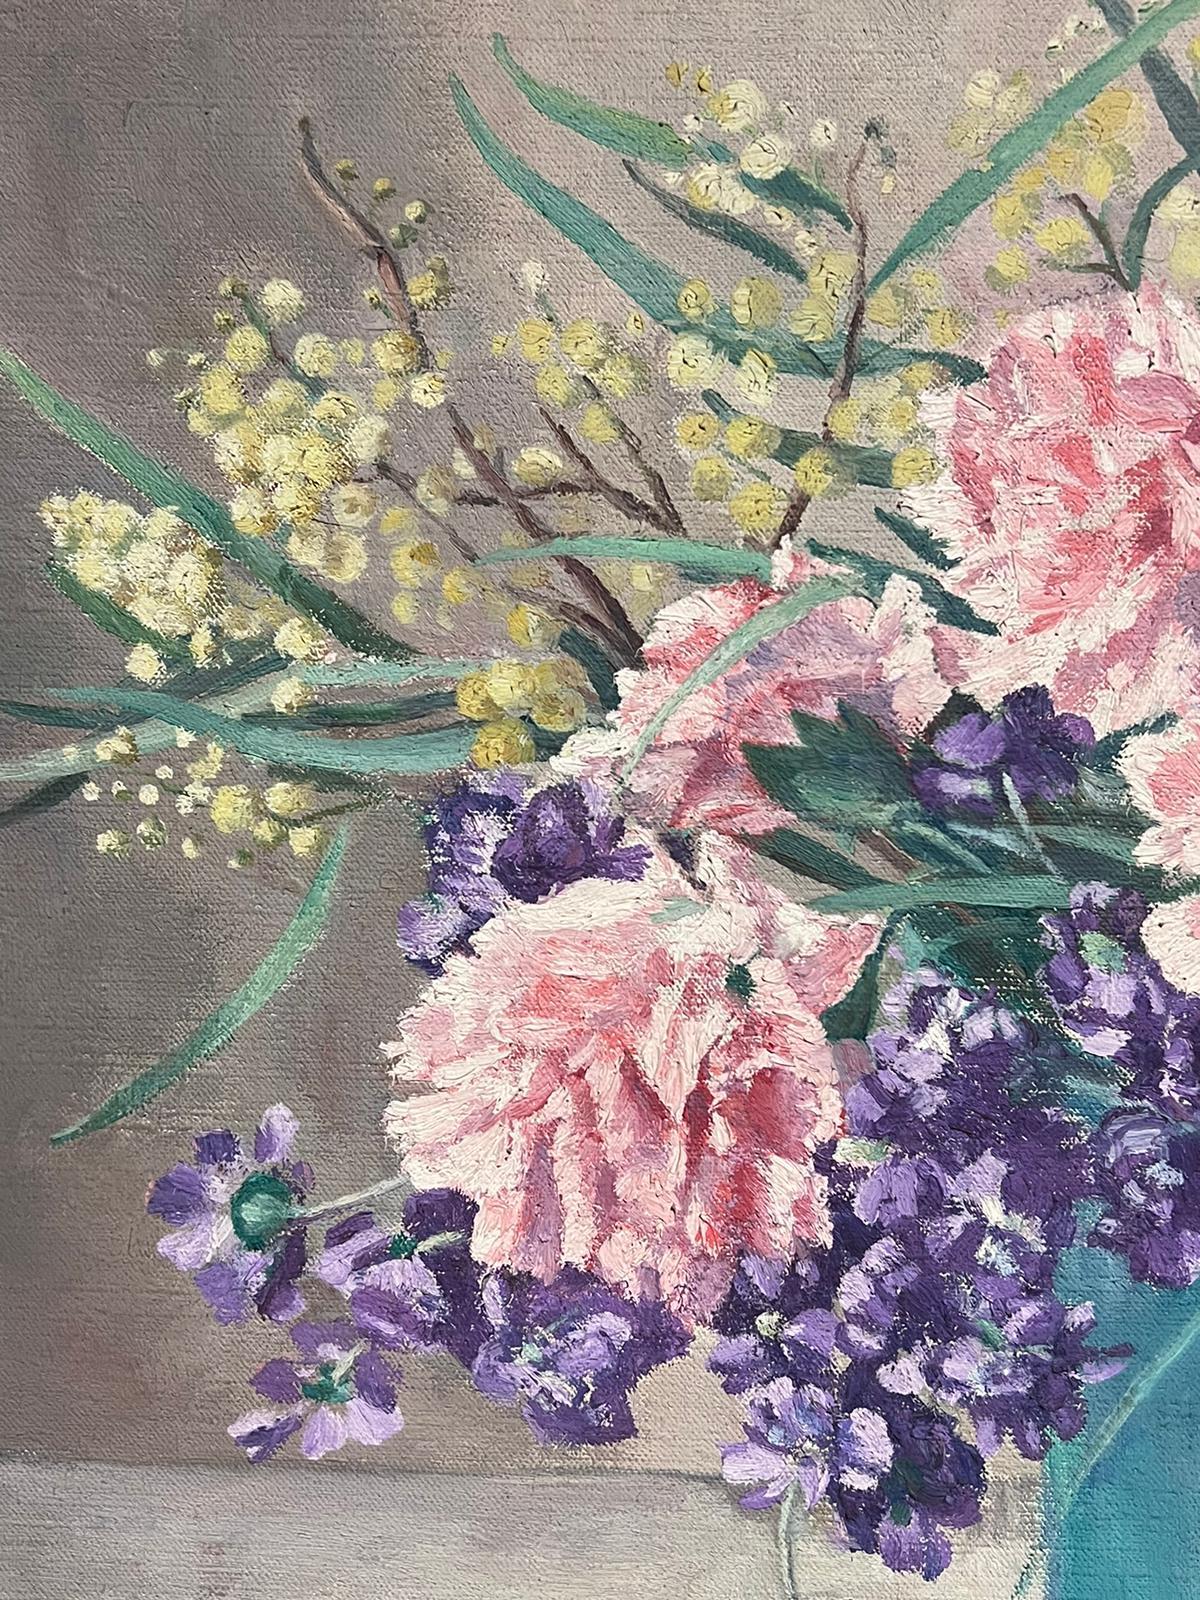 Pink Flowers Still Life
French impressionist artist, mid 20th century
signed oil on canvas, unframed
canvas: 18 x 21.5 inches
provenance: private collection, France
condition: a few minor scuffs but overall good and sound condition 